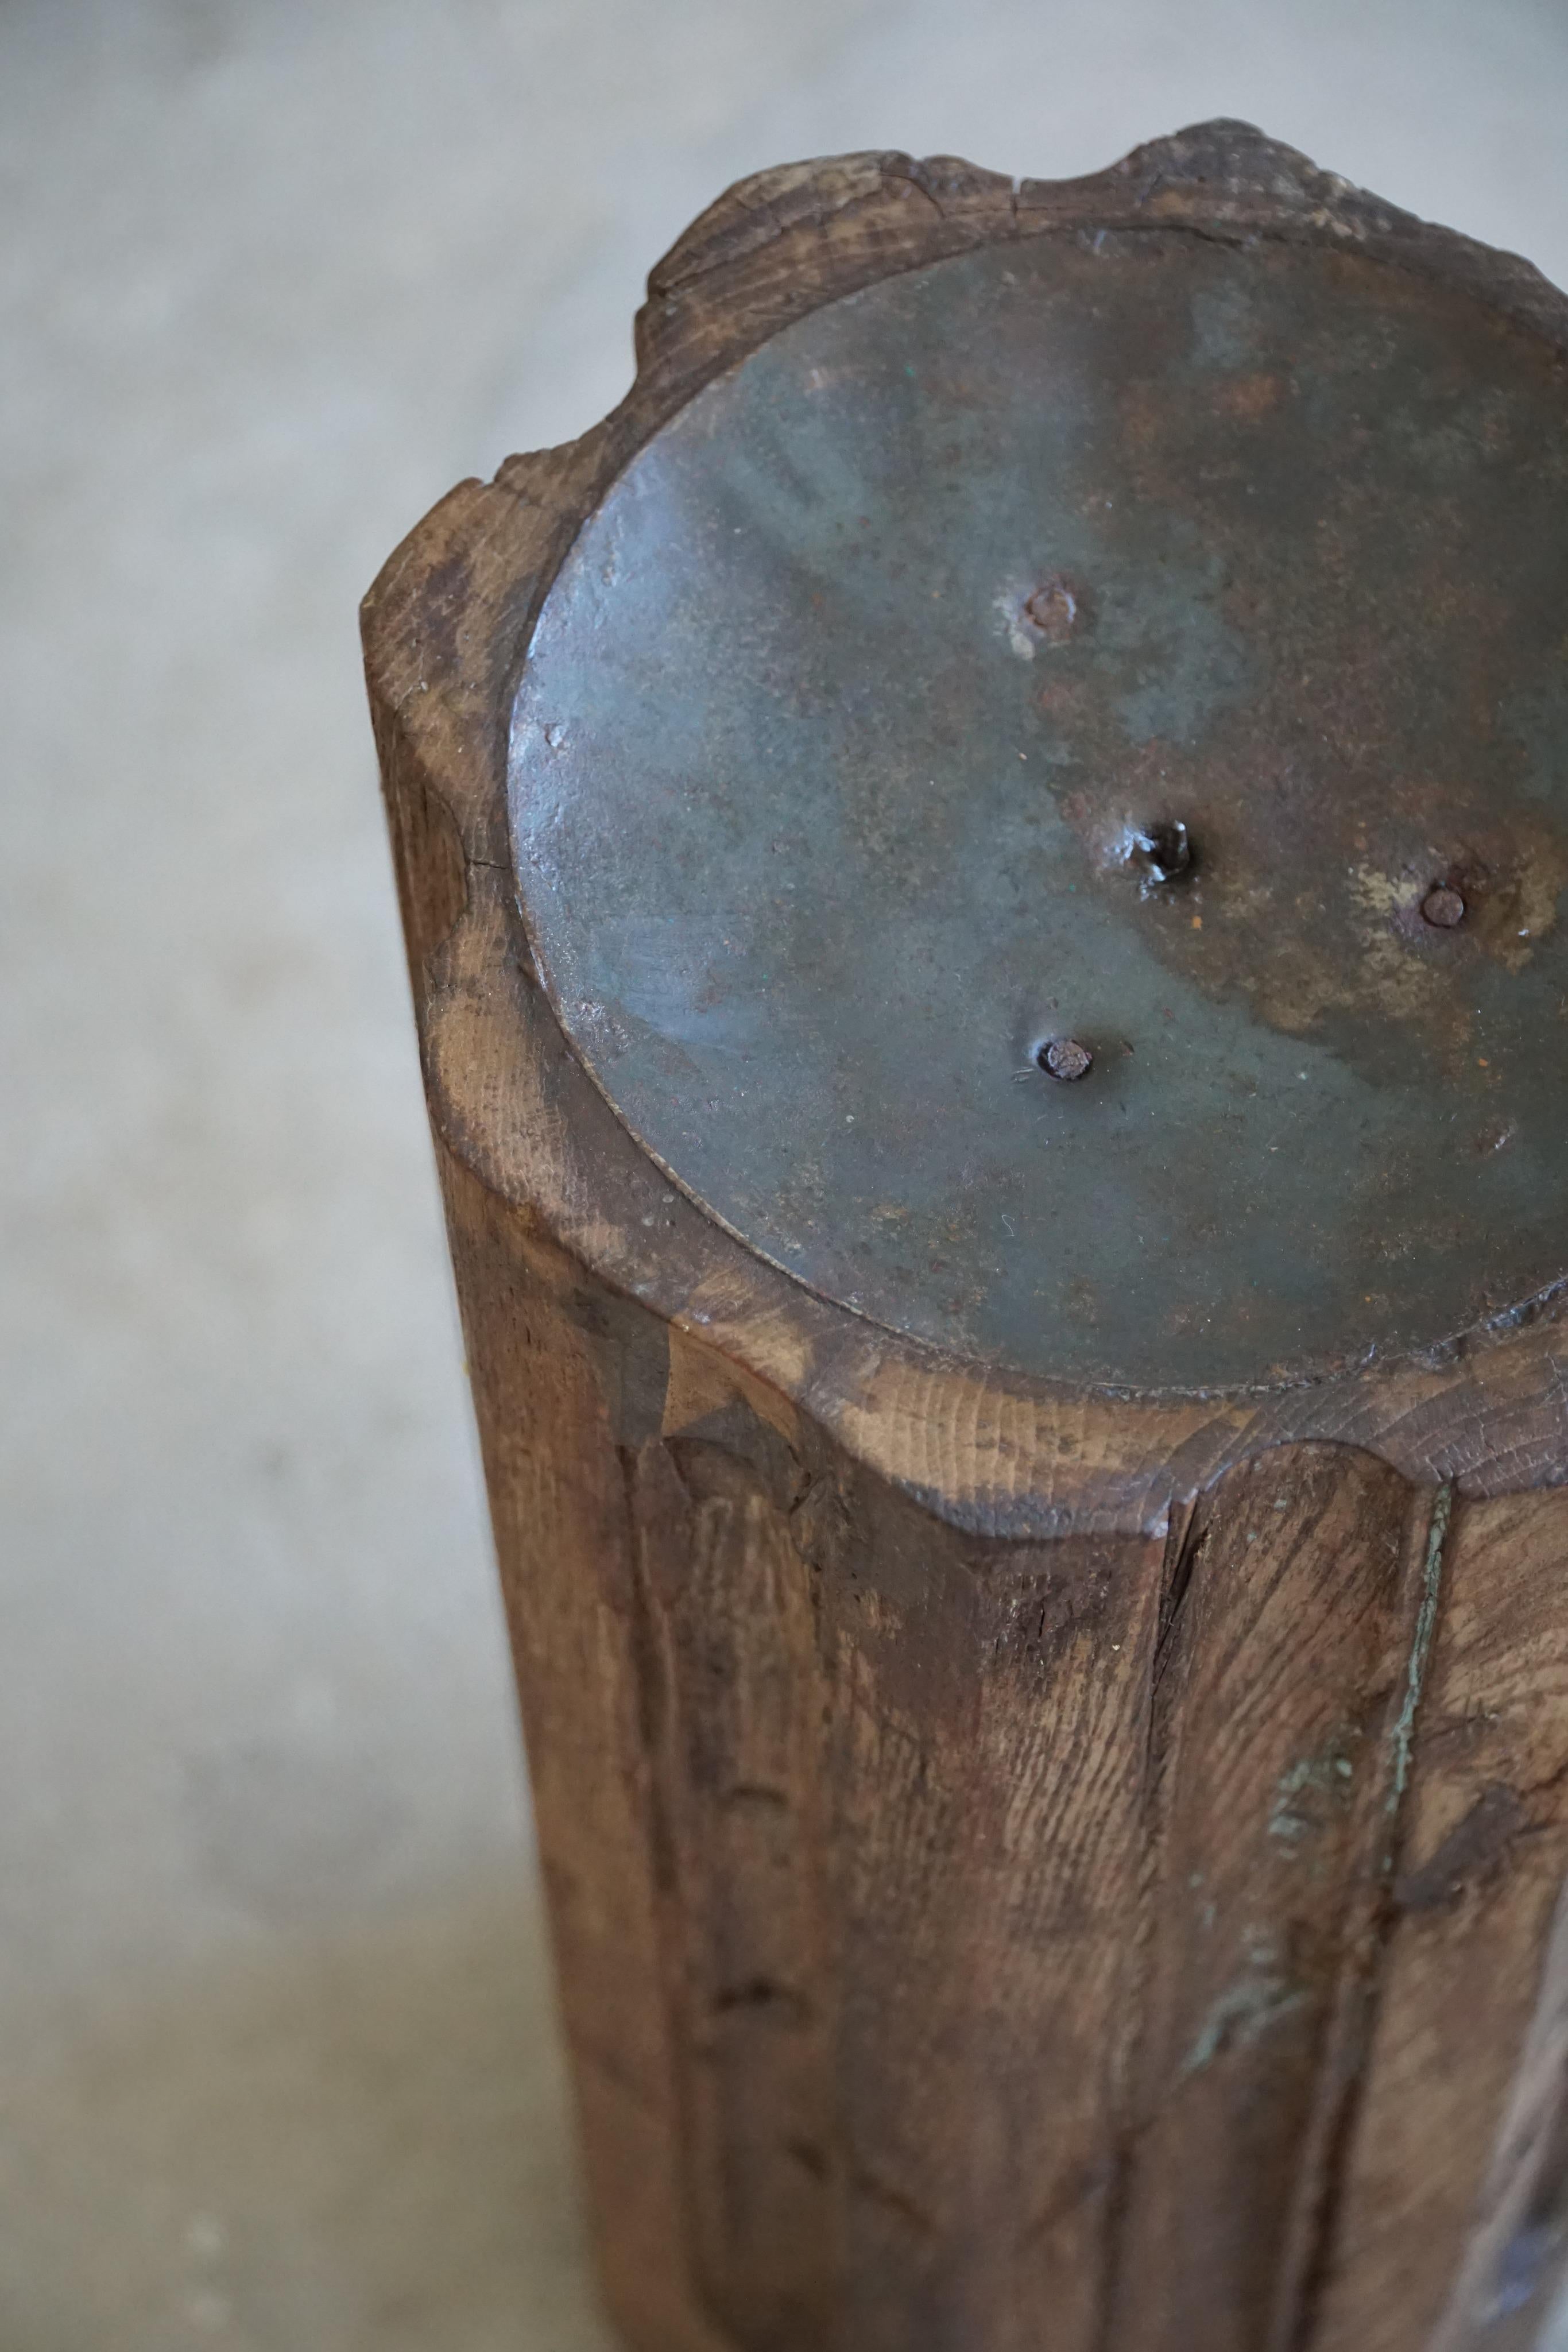 Scandinavian Solid Wooden Handcrafted Torchére, Floor Candle Holder from the 1920s